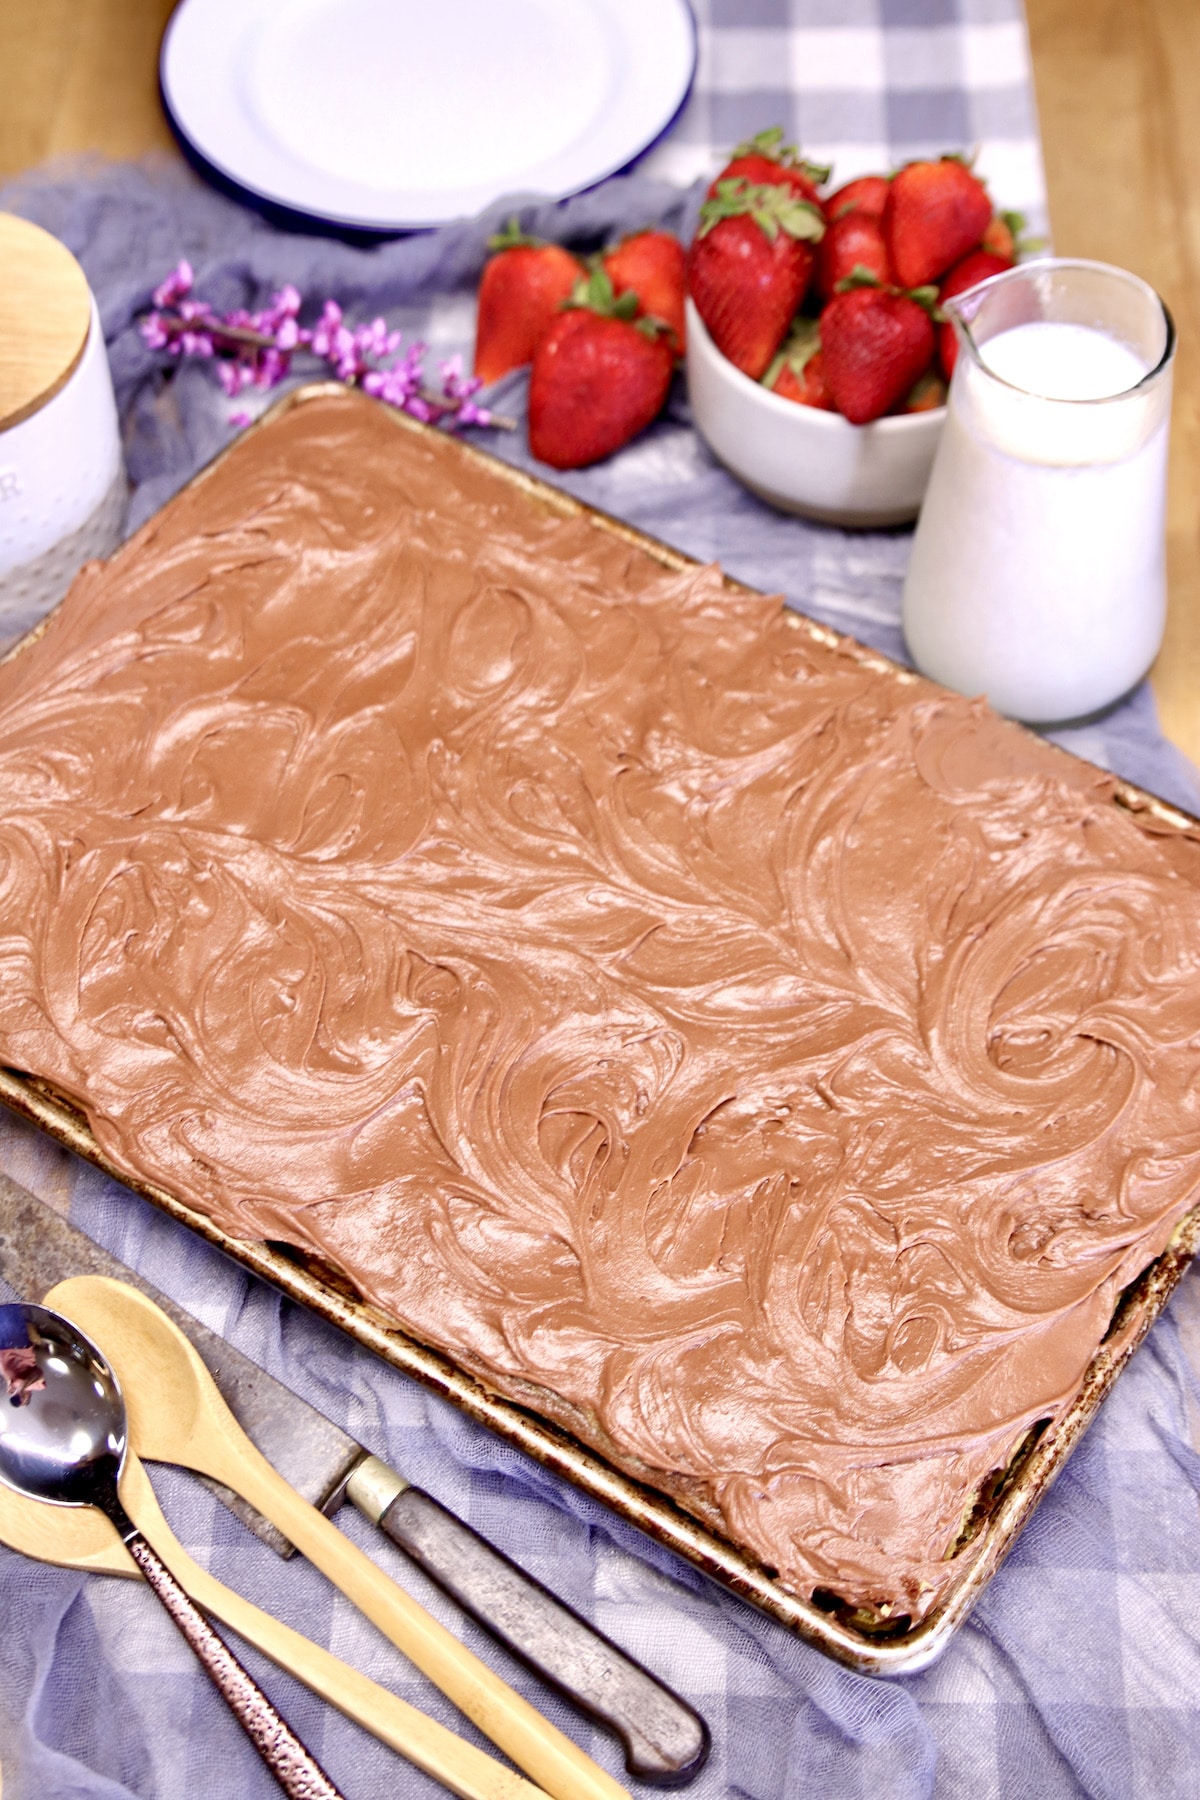 Sheet cake with chocolate frosting.